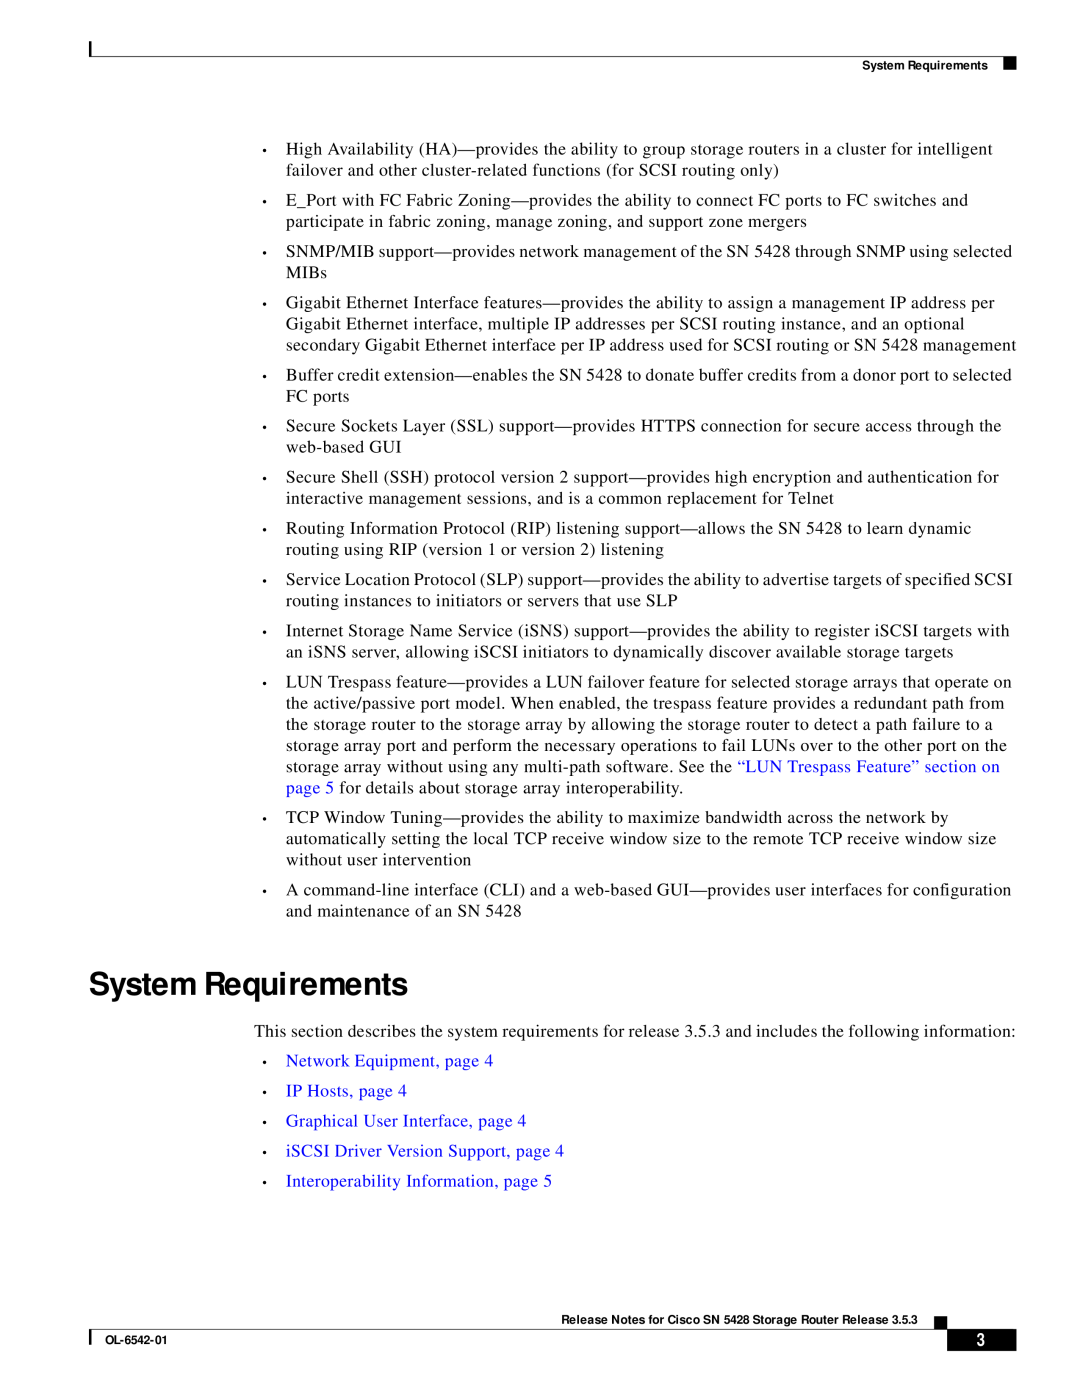 Cisco Systems SN 5428 manual System Requirements, Network Equipment, page IP Hosts, page Graphical User Interface, page 